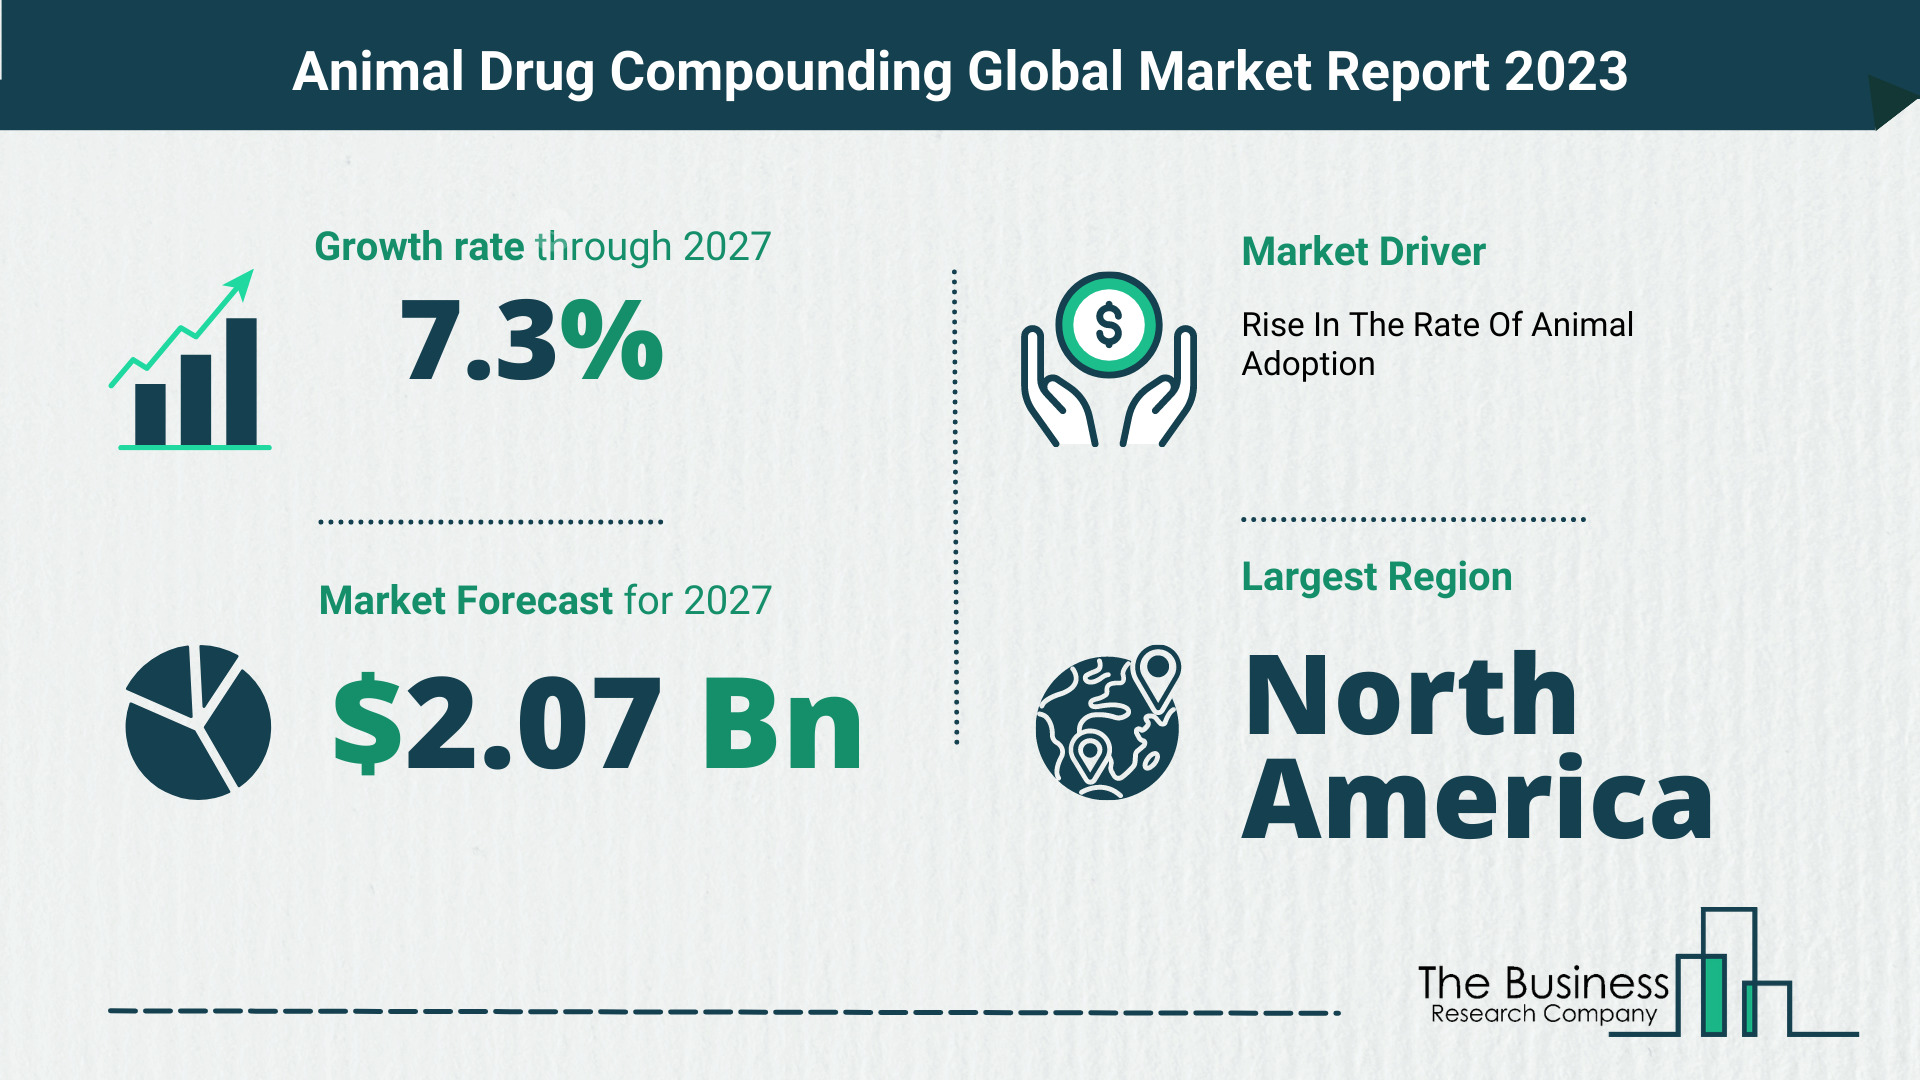 Global Animal Drug Compounding Market Opportunities And Strategies 2023